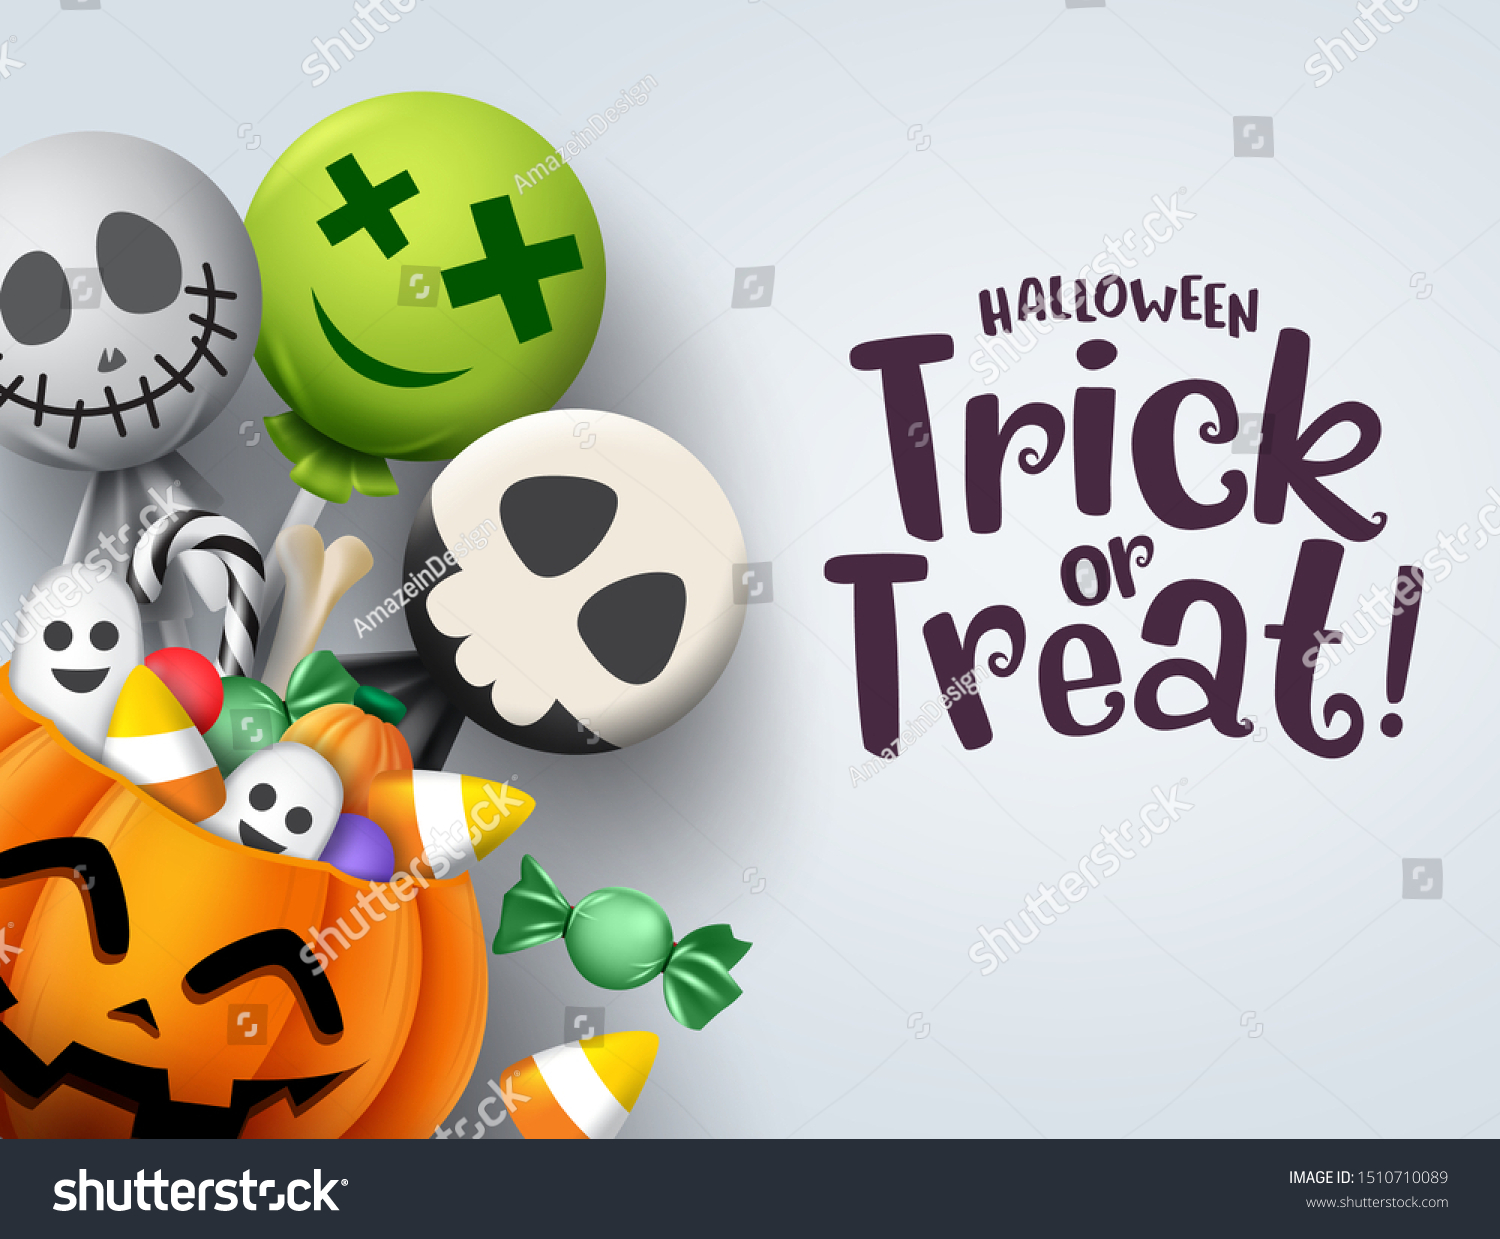 Trick or treat hallowenn greeting card vector background. Halloween trick or treat with pumpkin and scary sweets elements of candies like candy cane and lollipop for party invitation in gray. #1510710089